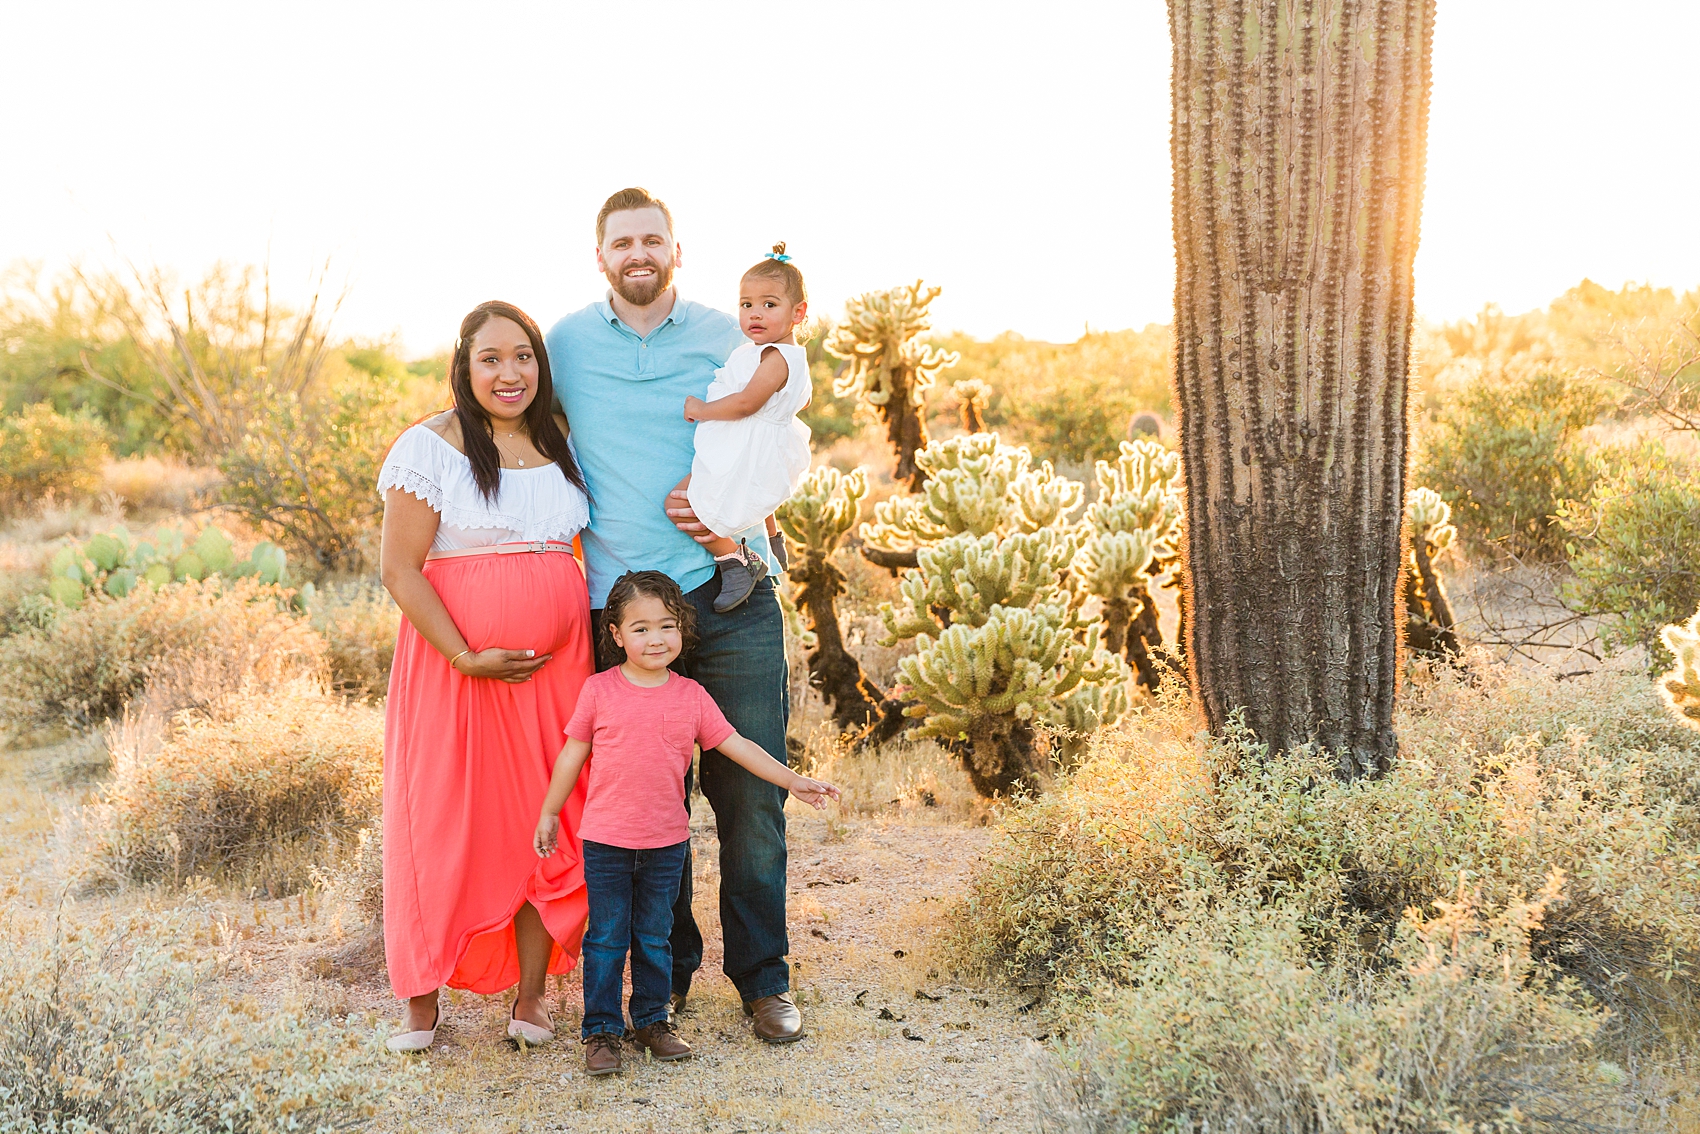 Leah Hope Photography | Scottsdale Phoenix Arizona | Desert Landscape Cactus Scenery Sunset Pictures | Family Photos | What to Wear | How to Pose | Family Posing | Maternity Pictures | Pregnancy Photos | Bump Photos | Styling